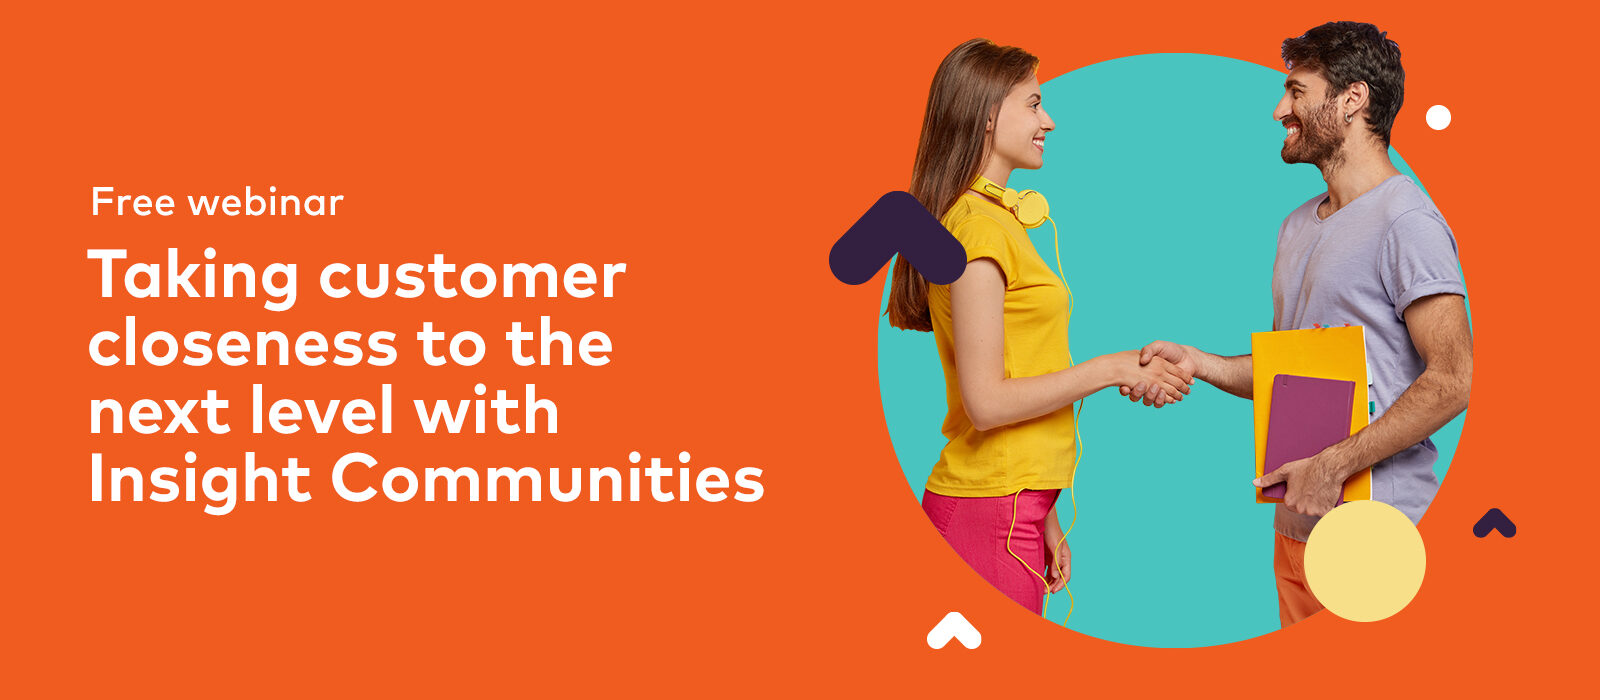 Taking customer closeness to the next level with Insight Communities